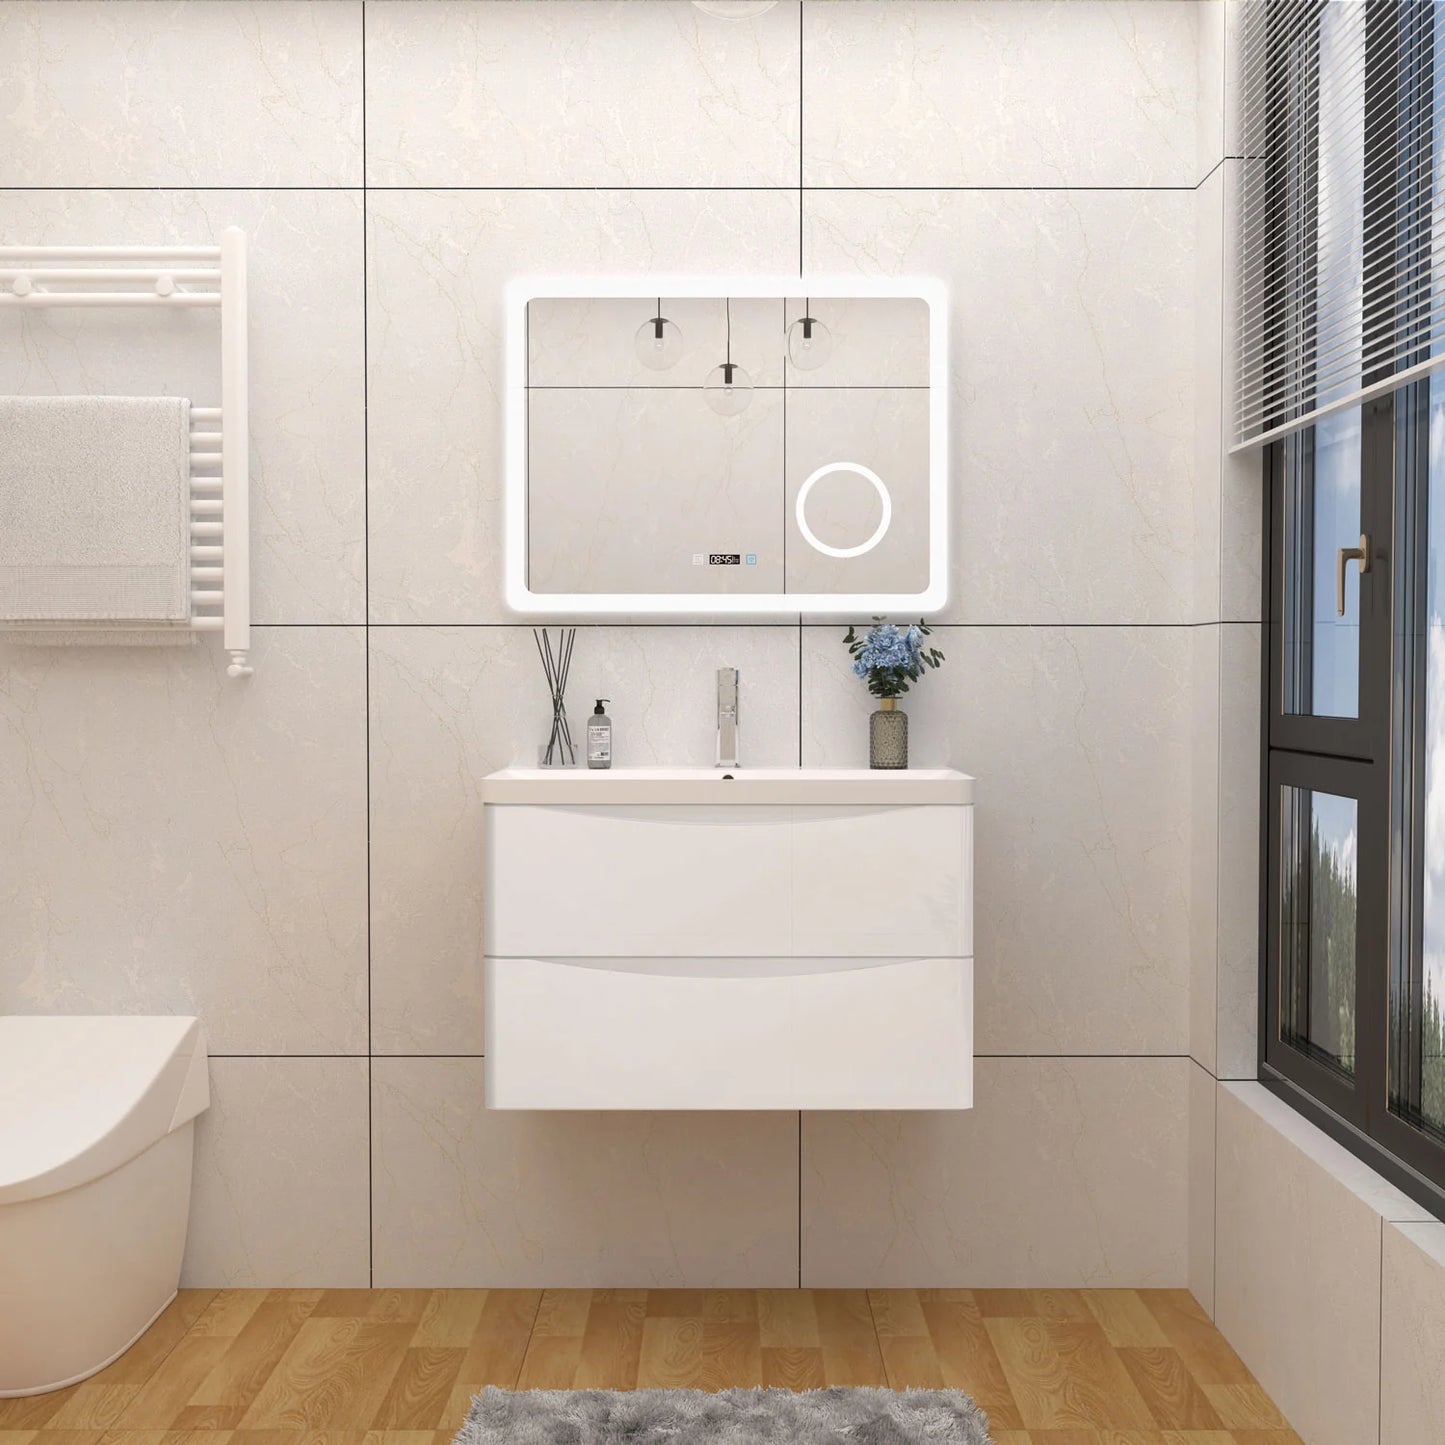 500/600/800mm Bathroom Vanity Units with Basin Gloss White Cloakroom Sink Unit Wall Hung Two Drawers